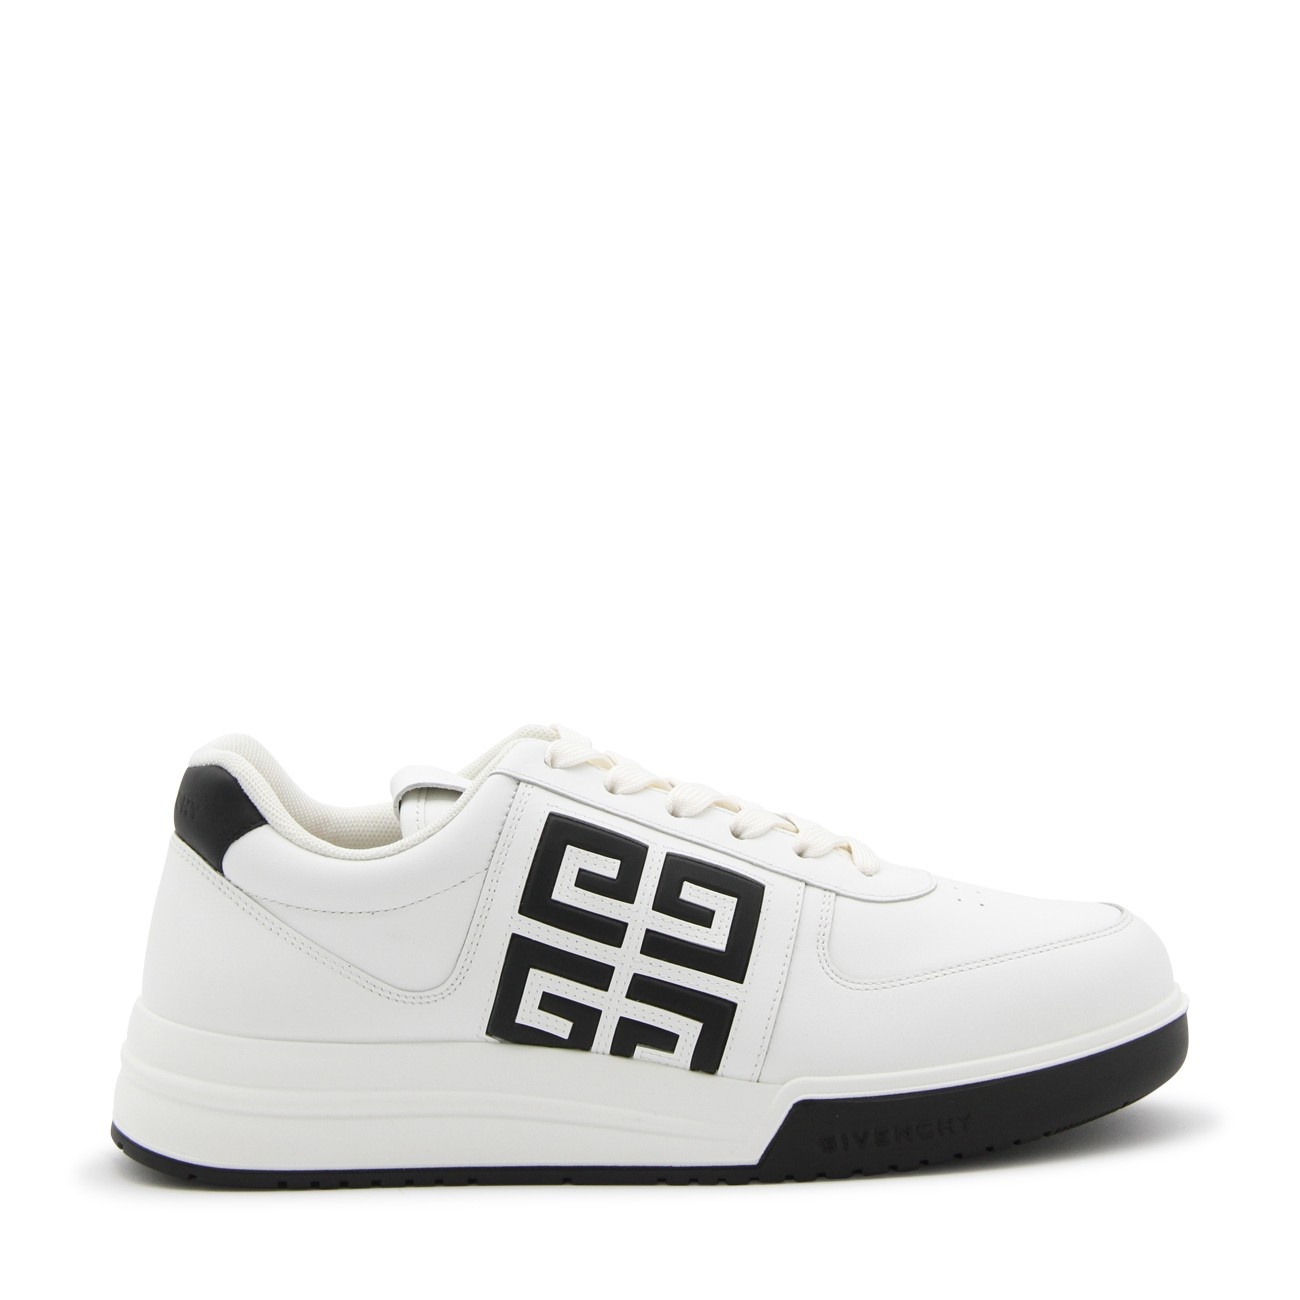 white and black leather sneakers - 1